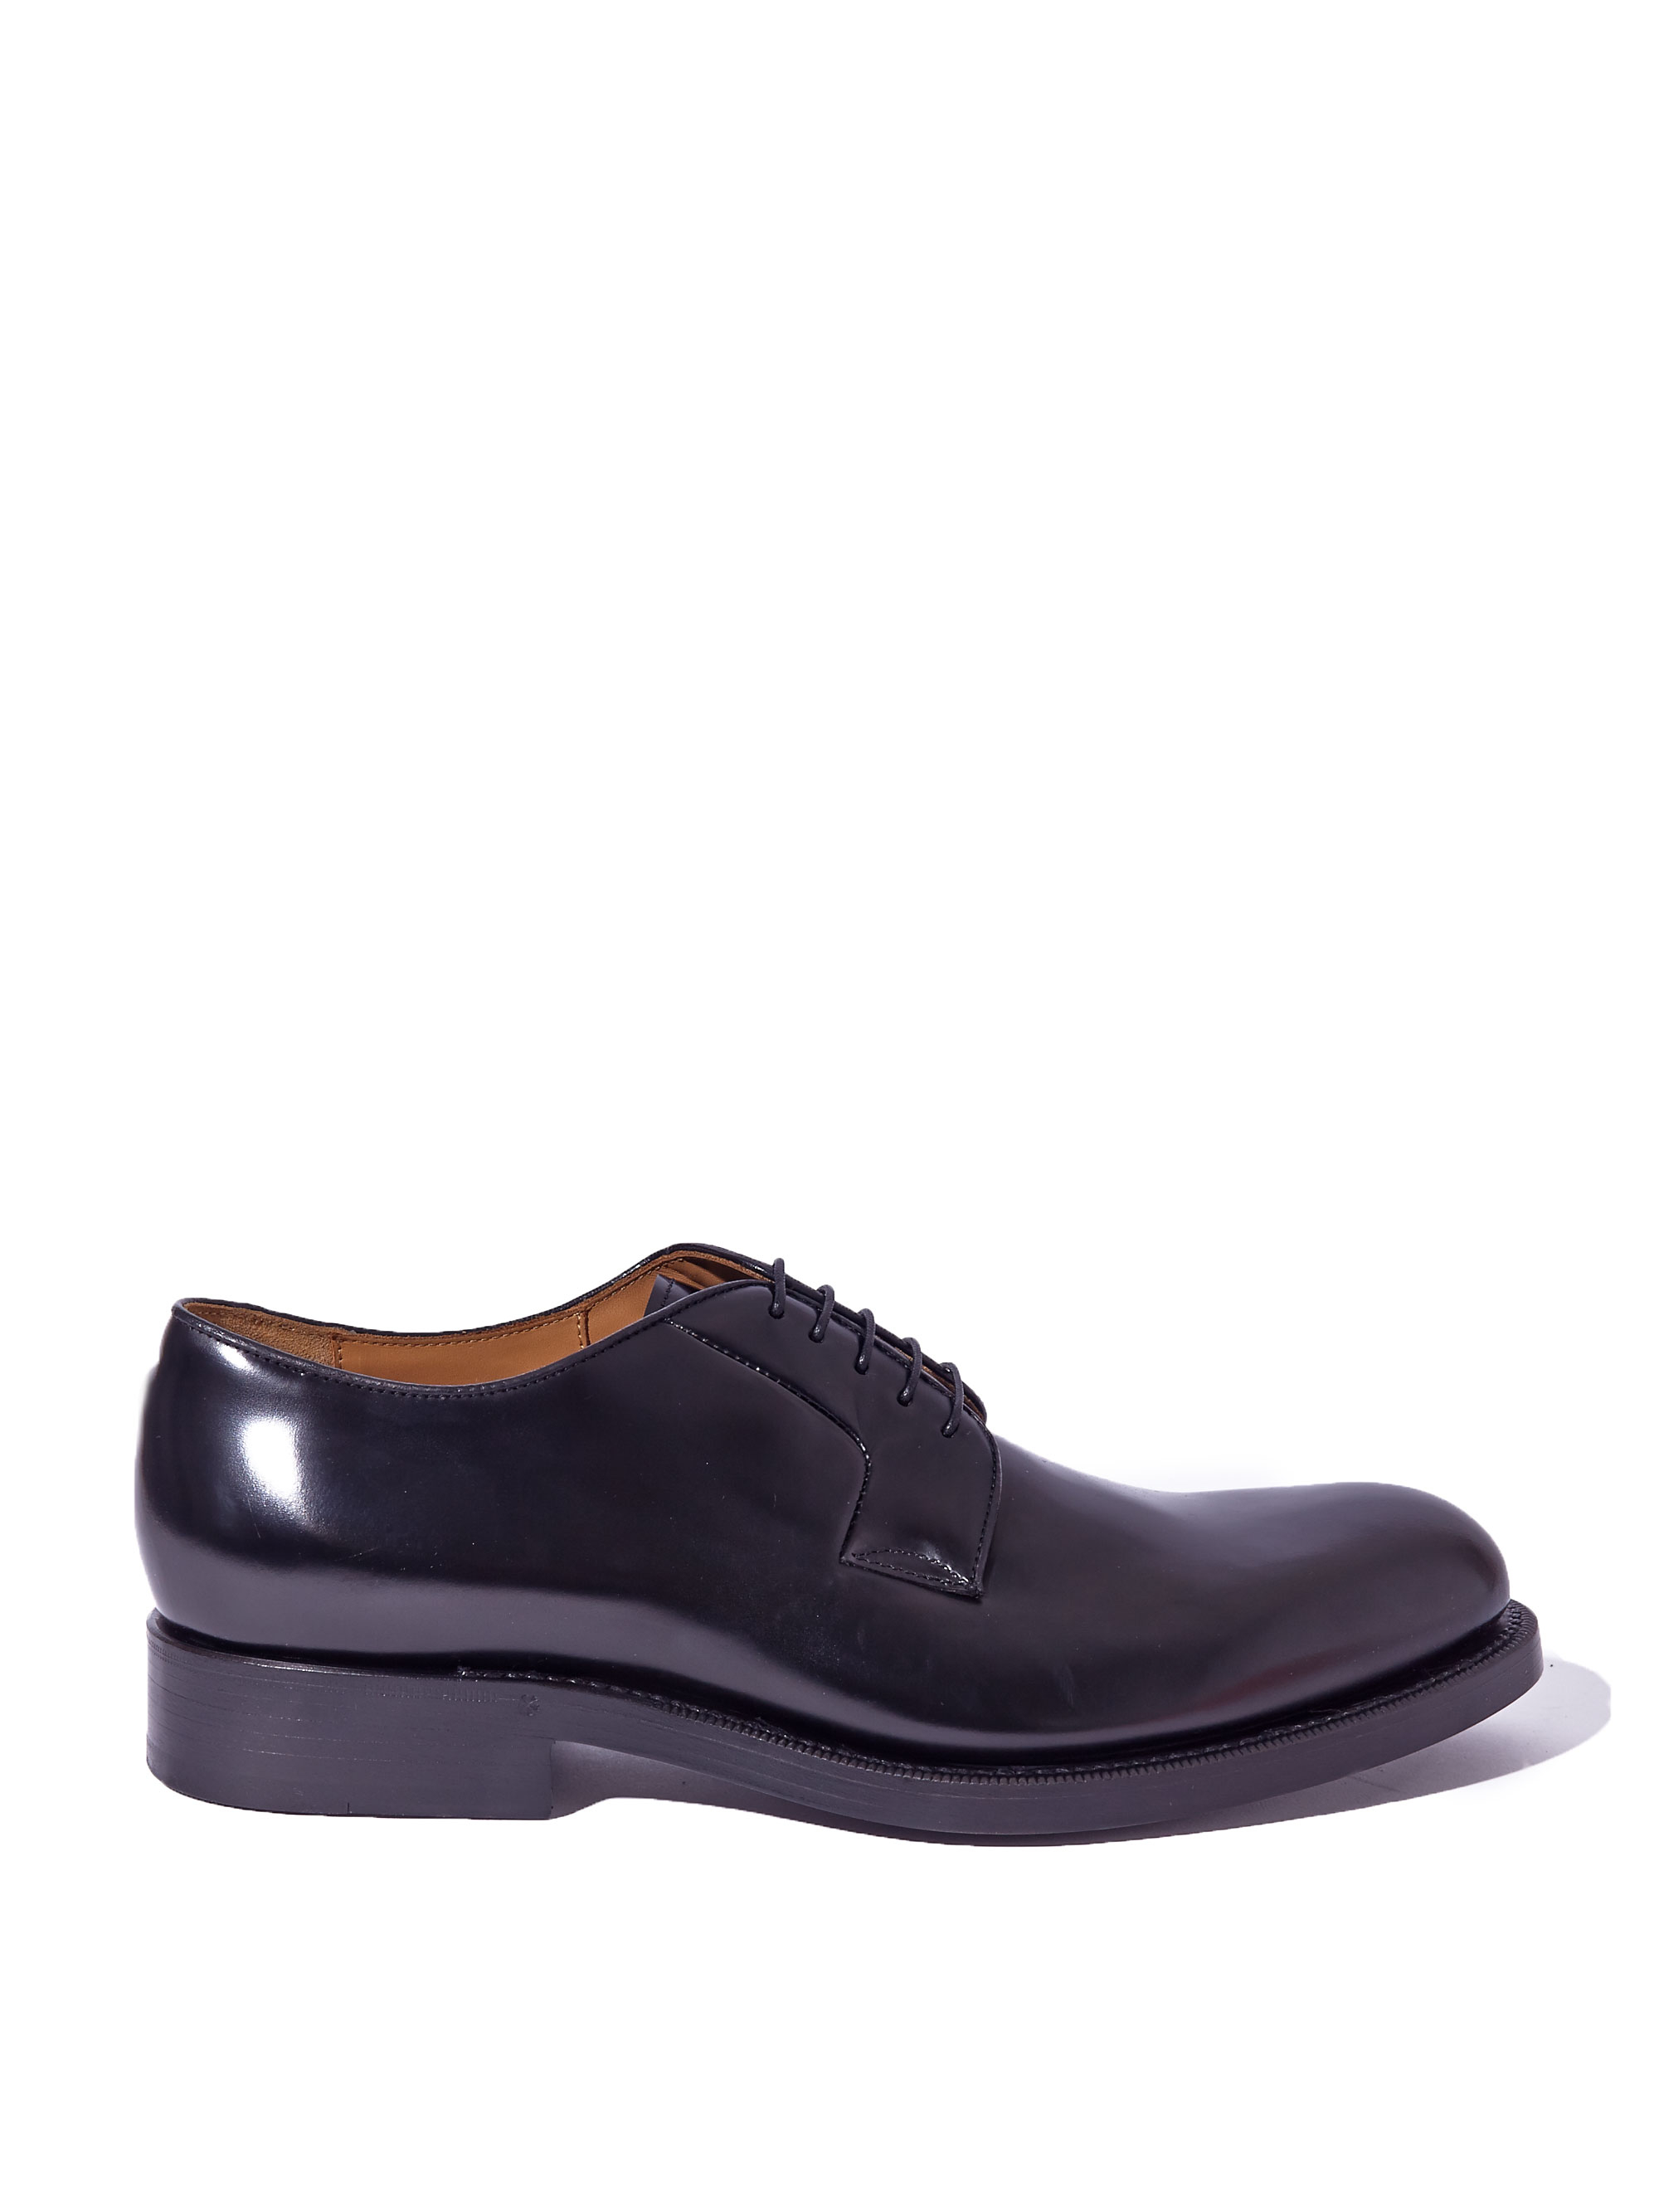 Lyst - Raf Simons Mens Classic Leather Derby Shoes in Black for Men